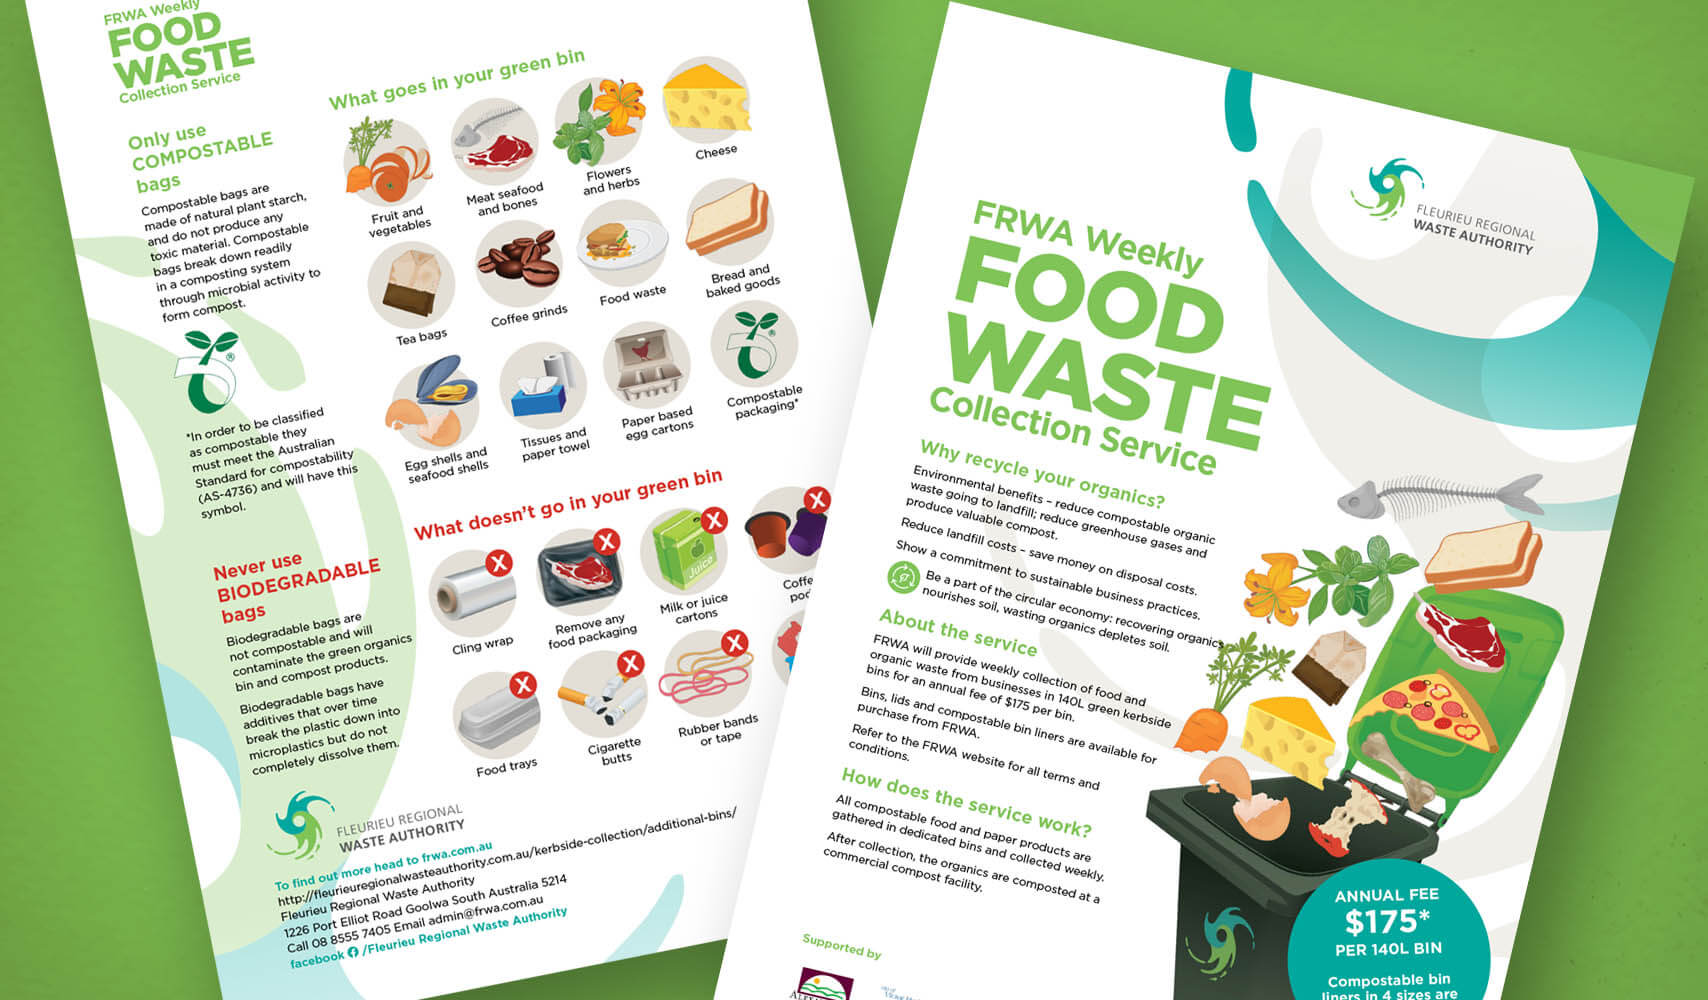 FRWA Food Waste Collection